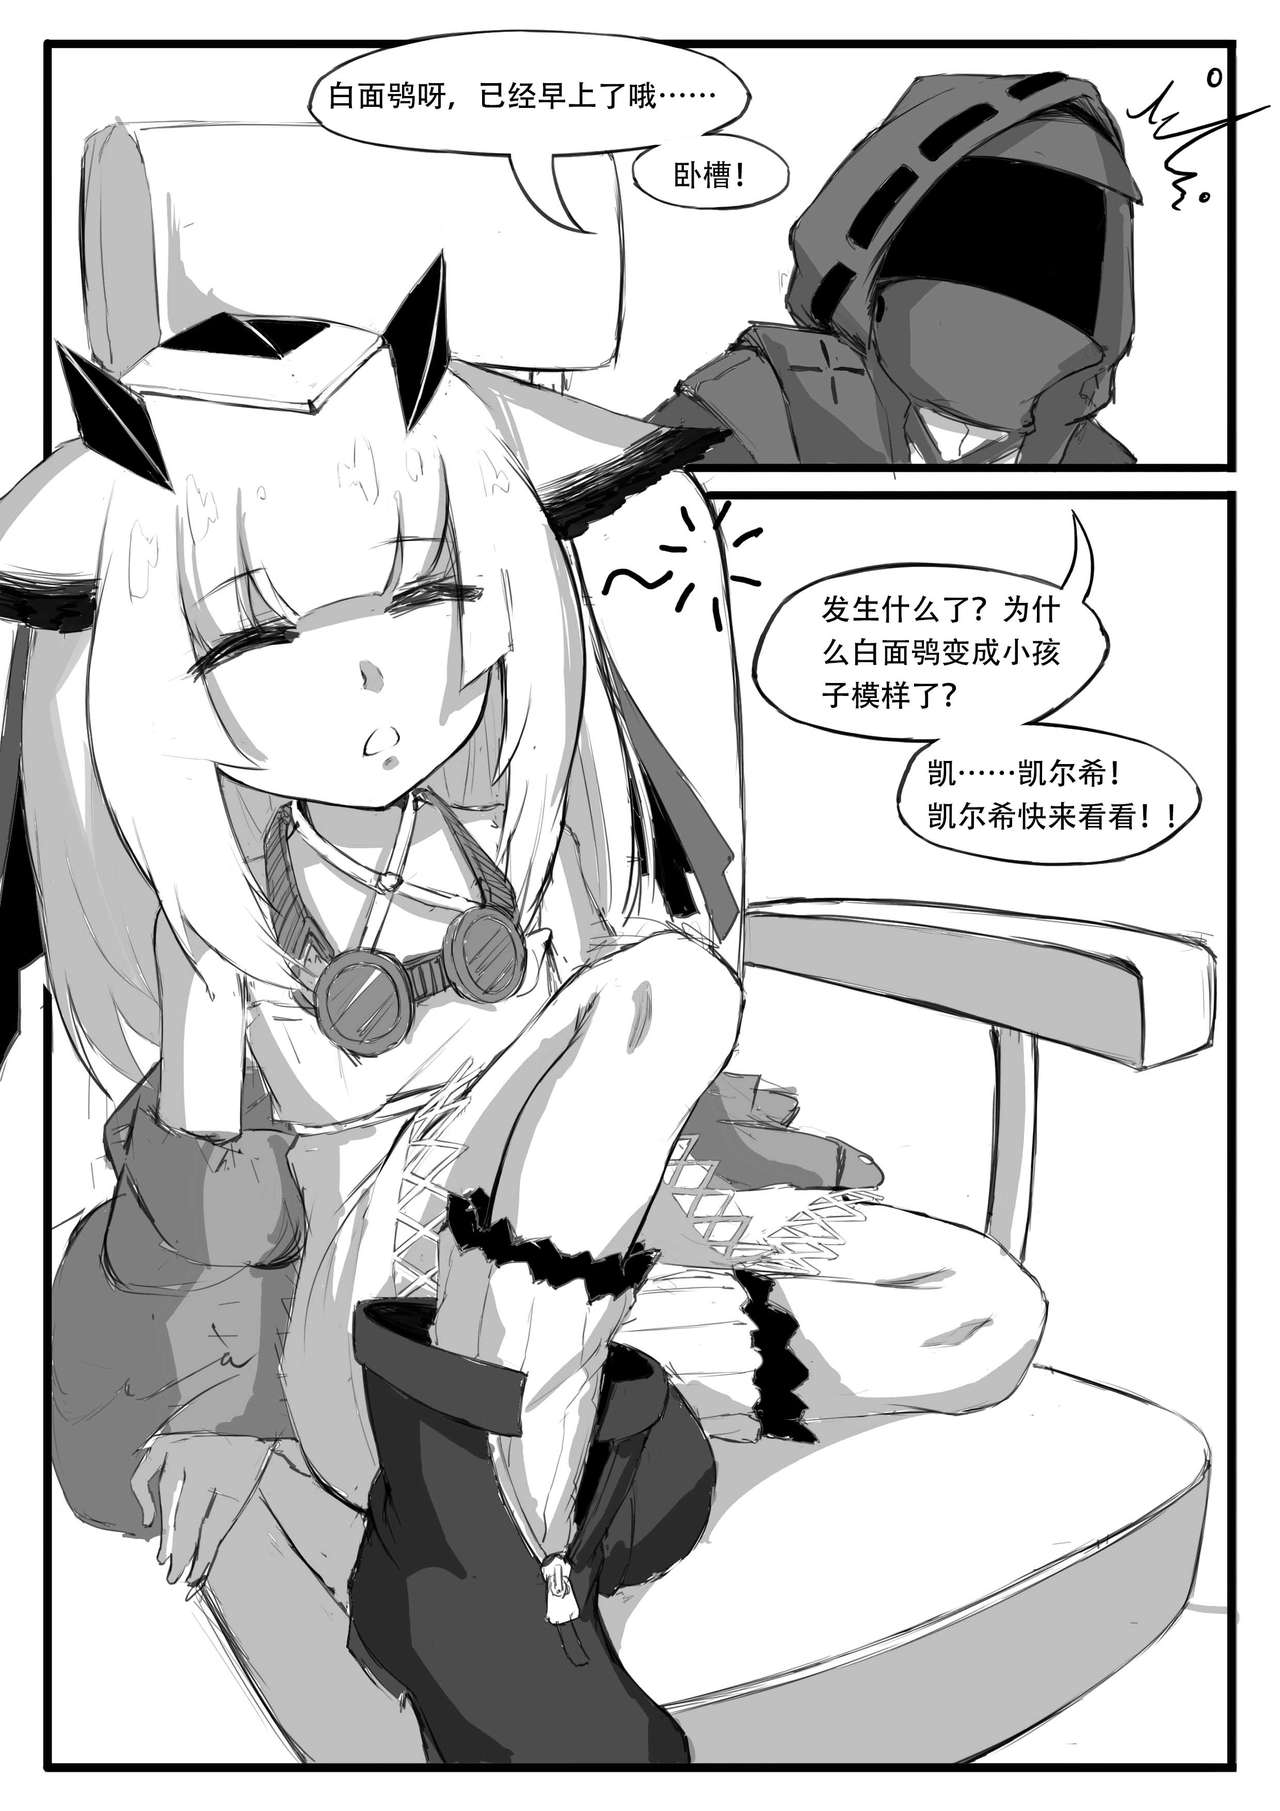 [saluky] 关于白面鸮变成了幼女这件事 (Arknights) [Chinese] page 9 full